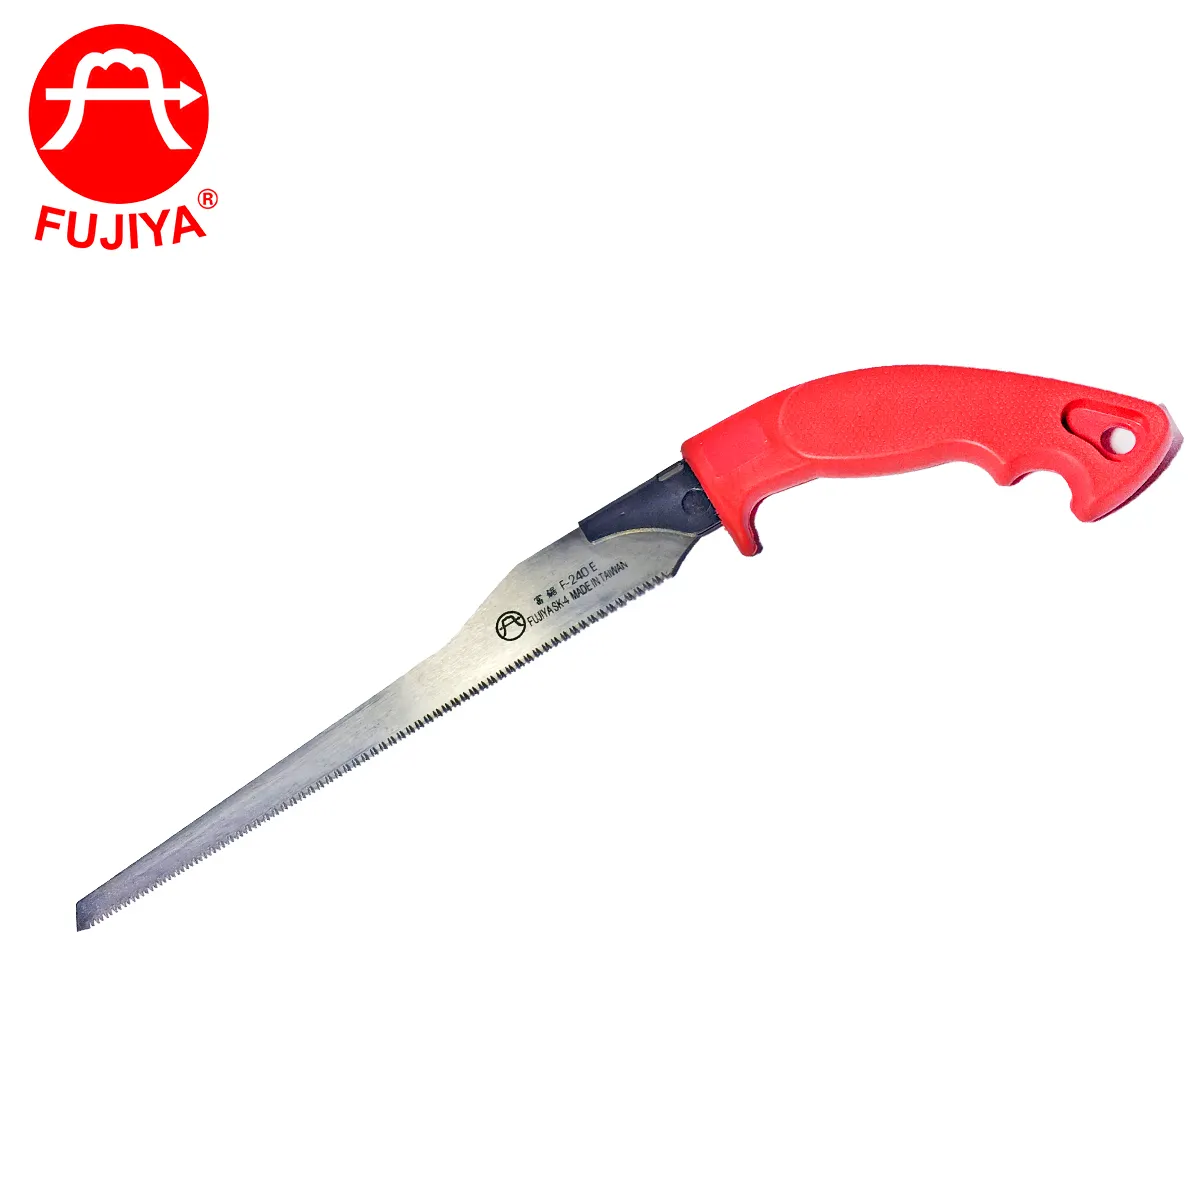 Home Depot Wood PVC Hand Saws with Replaceable blades l ABS PPR comfort anti-slipping handle l SK-4 alloy steel blade